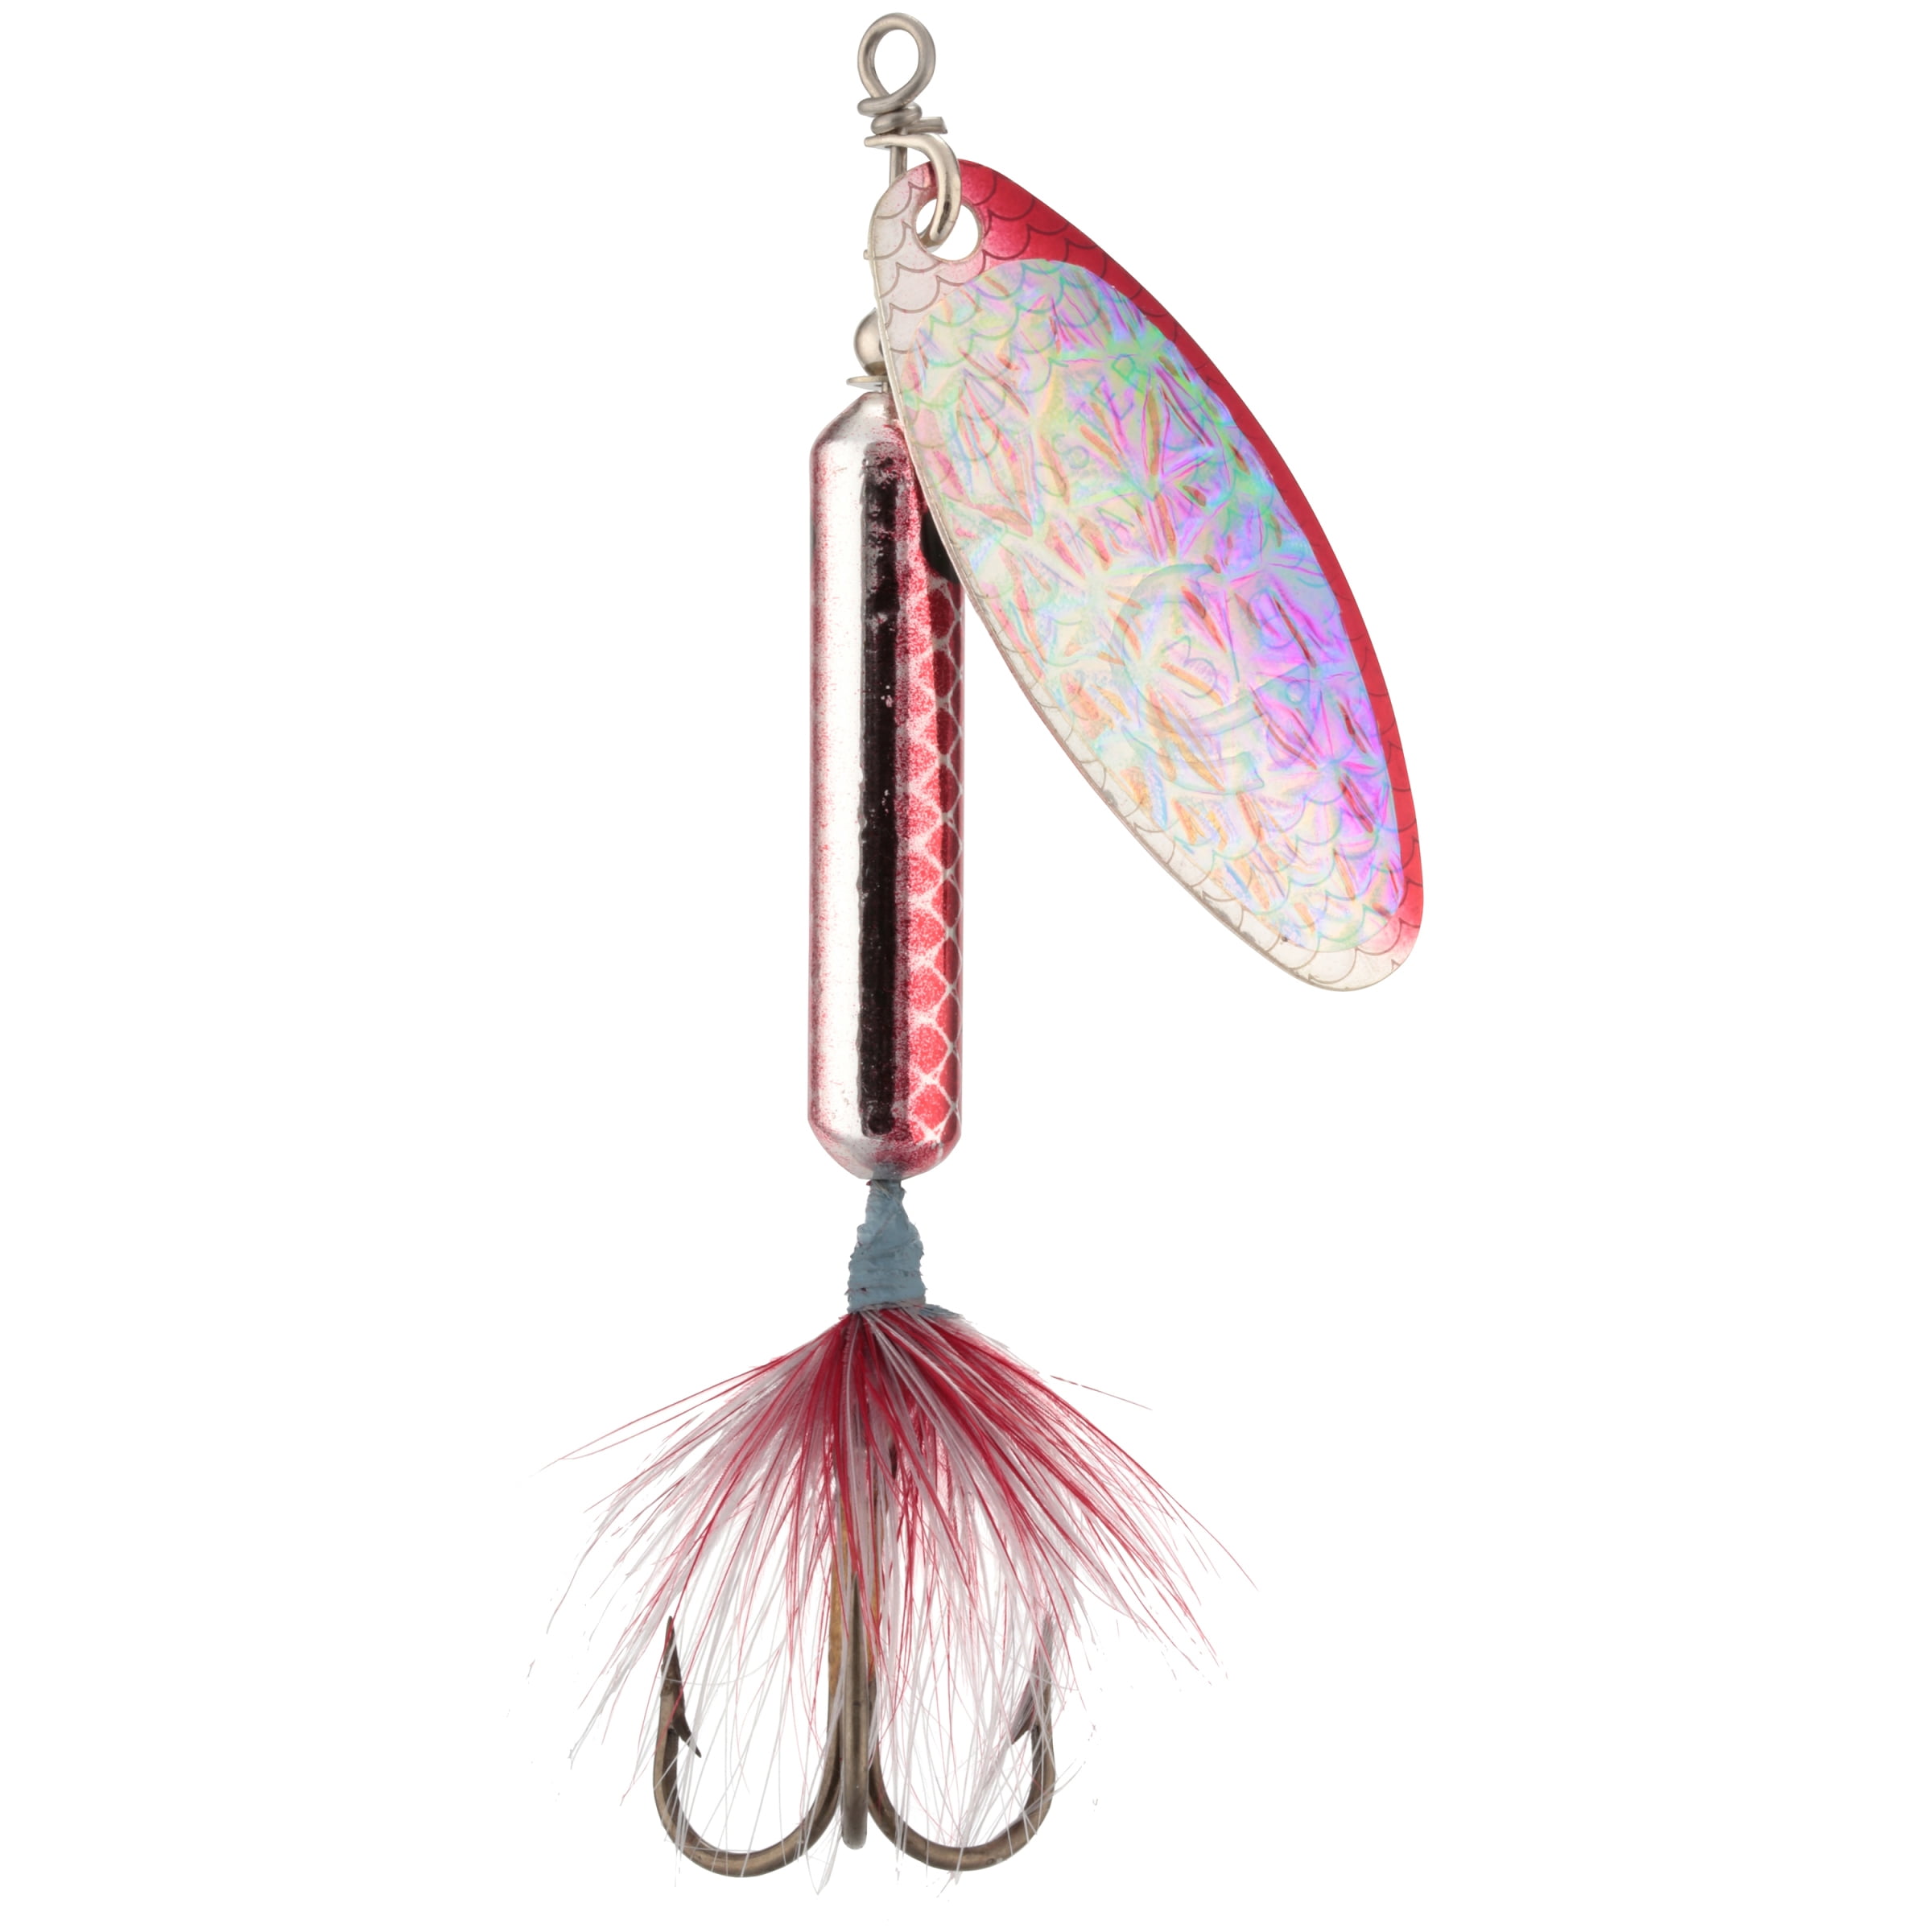 Worden's® Original 3/8 oz. Rooster Tail® Inline Spinnerbaits